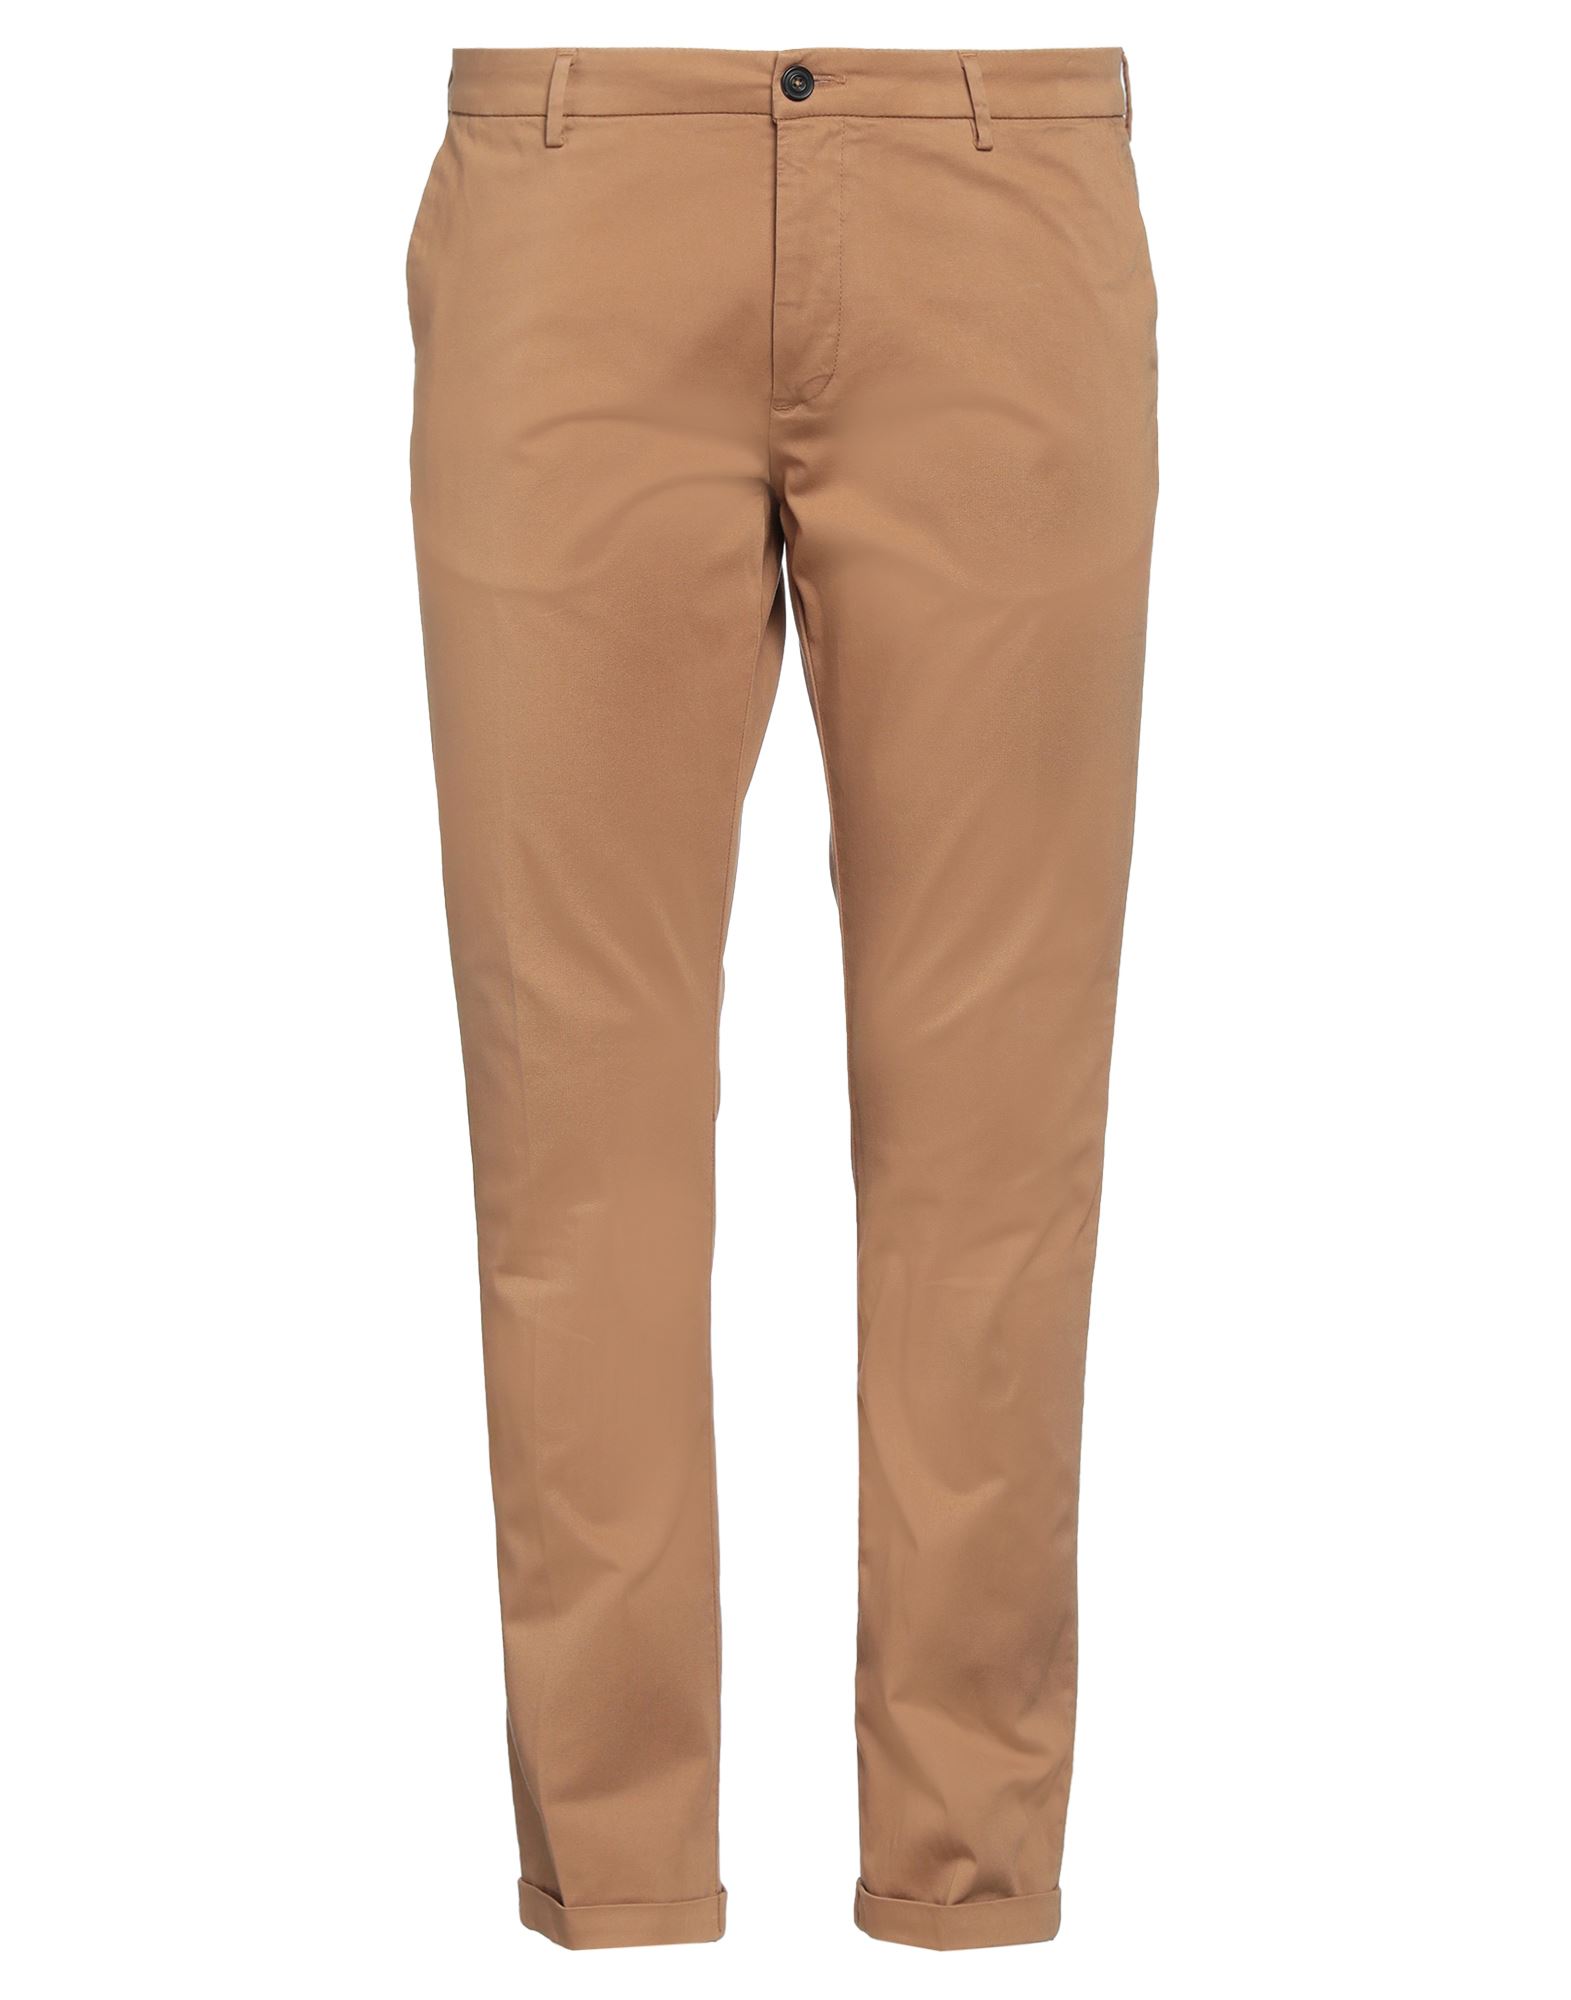 Pence Pants In Camel